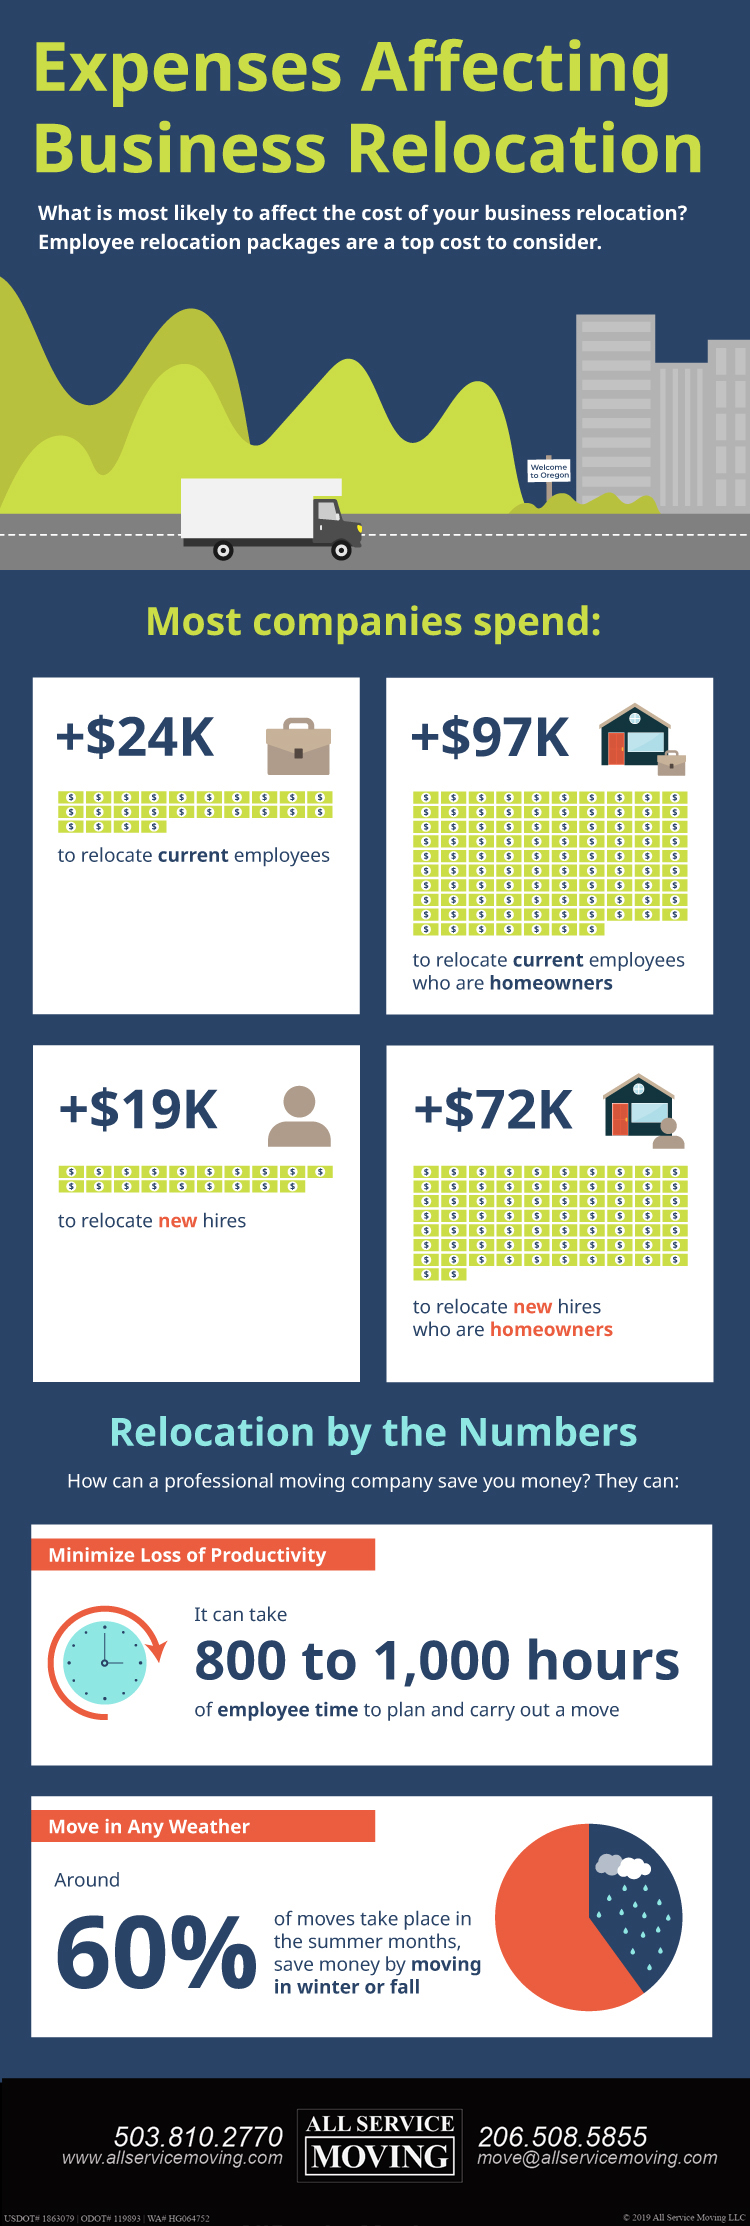 Expenses-Affecting-Business-Relocation-All-Service-Moving-Infographic